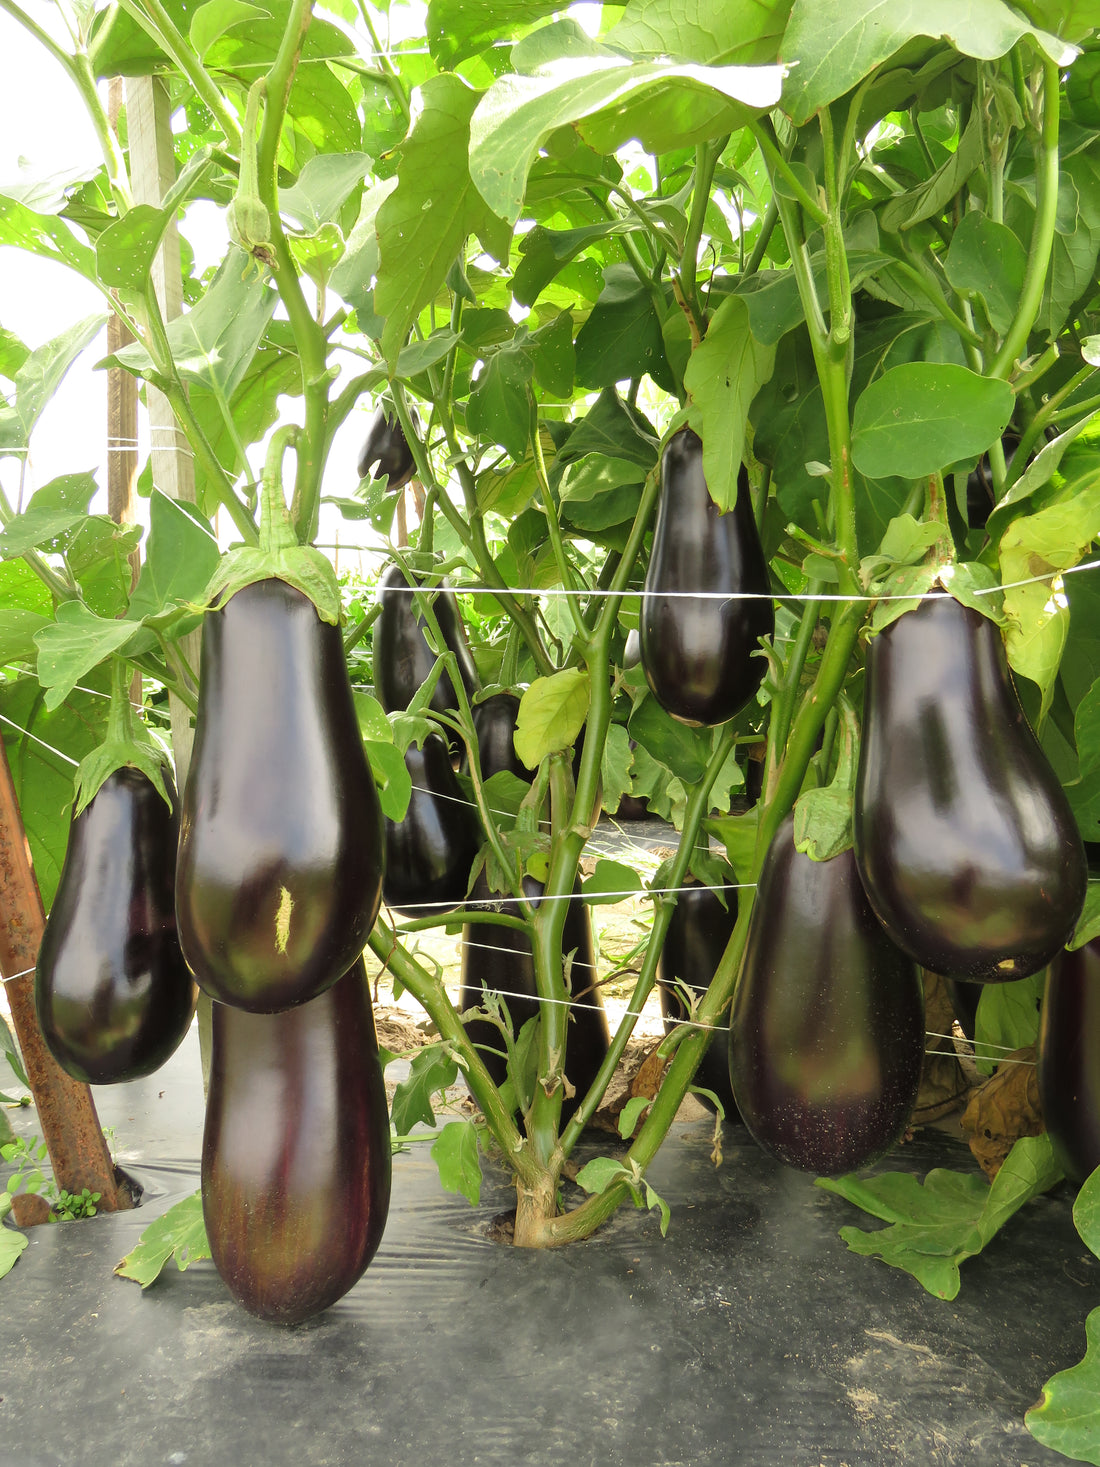 How to grow eggplant from seeds